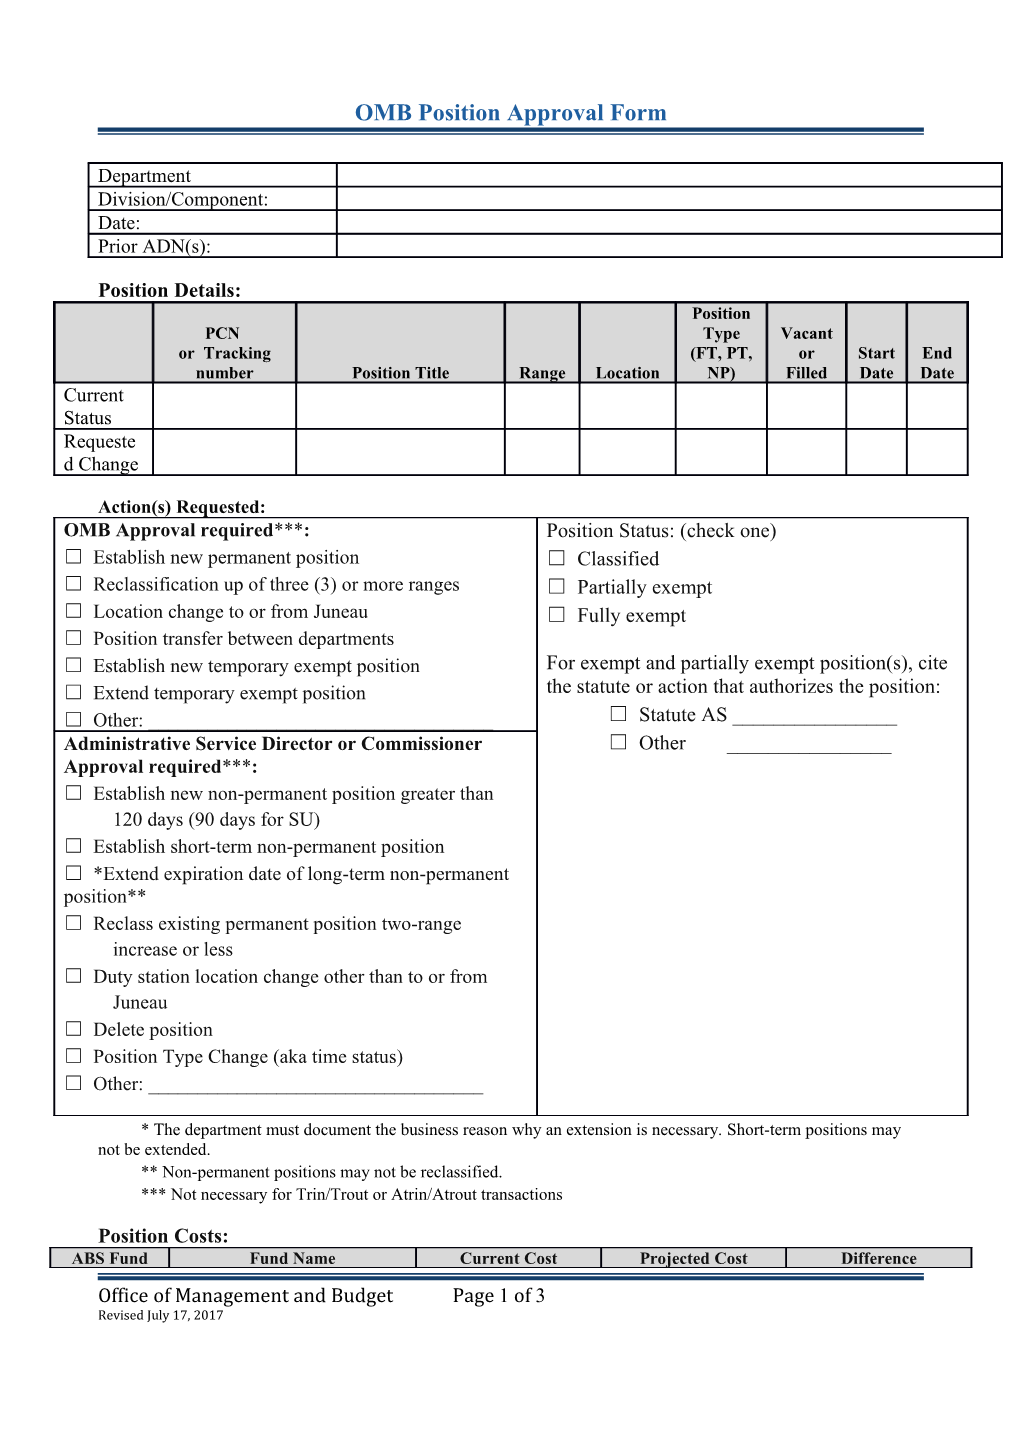 OMB Position Approval Form